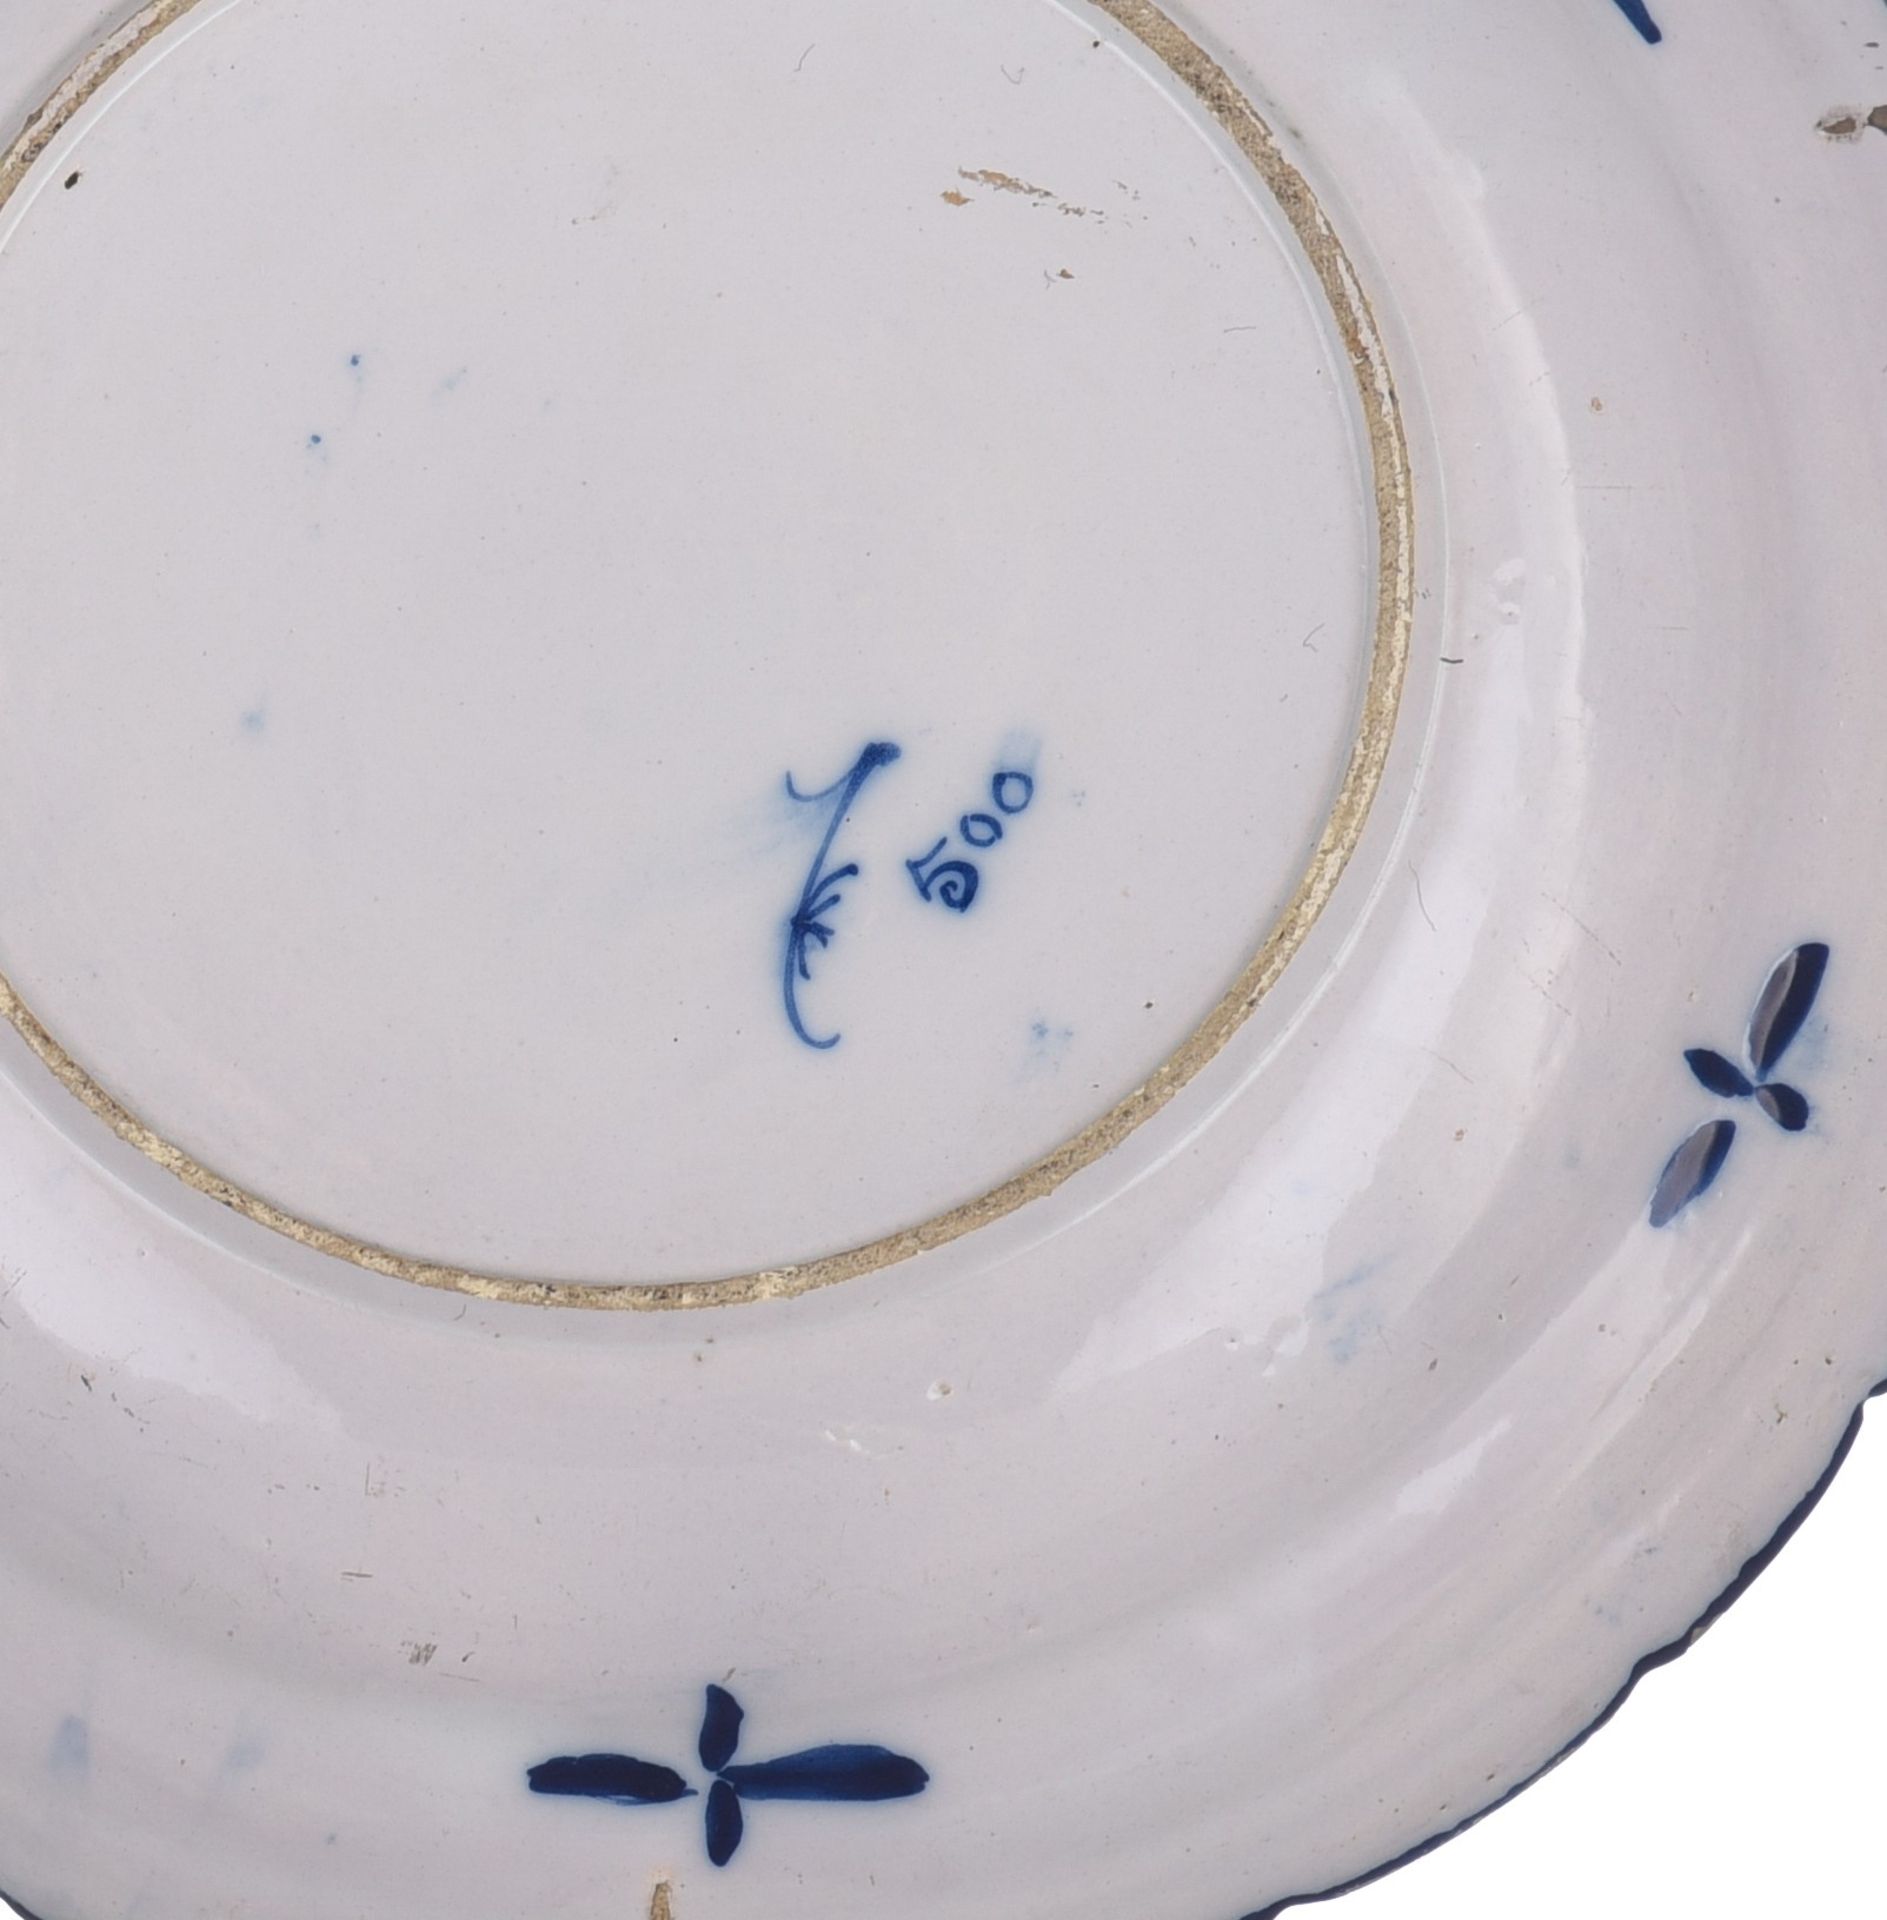 A collection of six Delft blue and white flower basket chargers, marked 'De Klauw', 18thC, ¯ 35 cm - Image 10 of 10